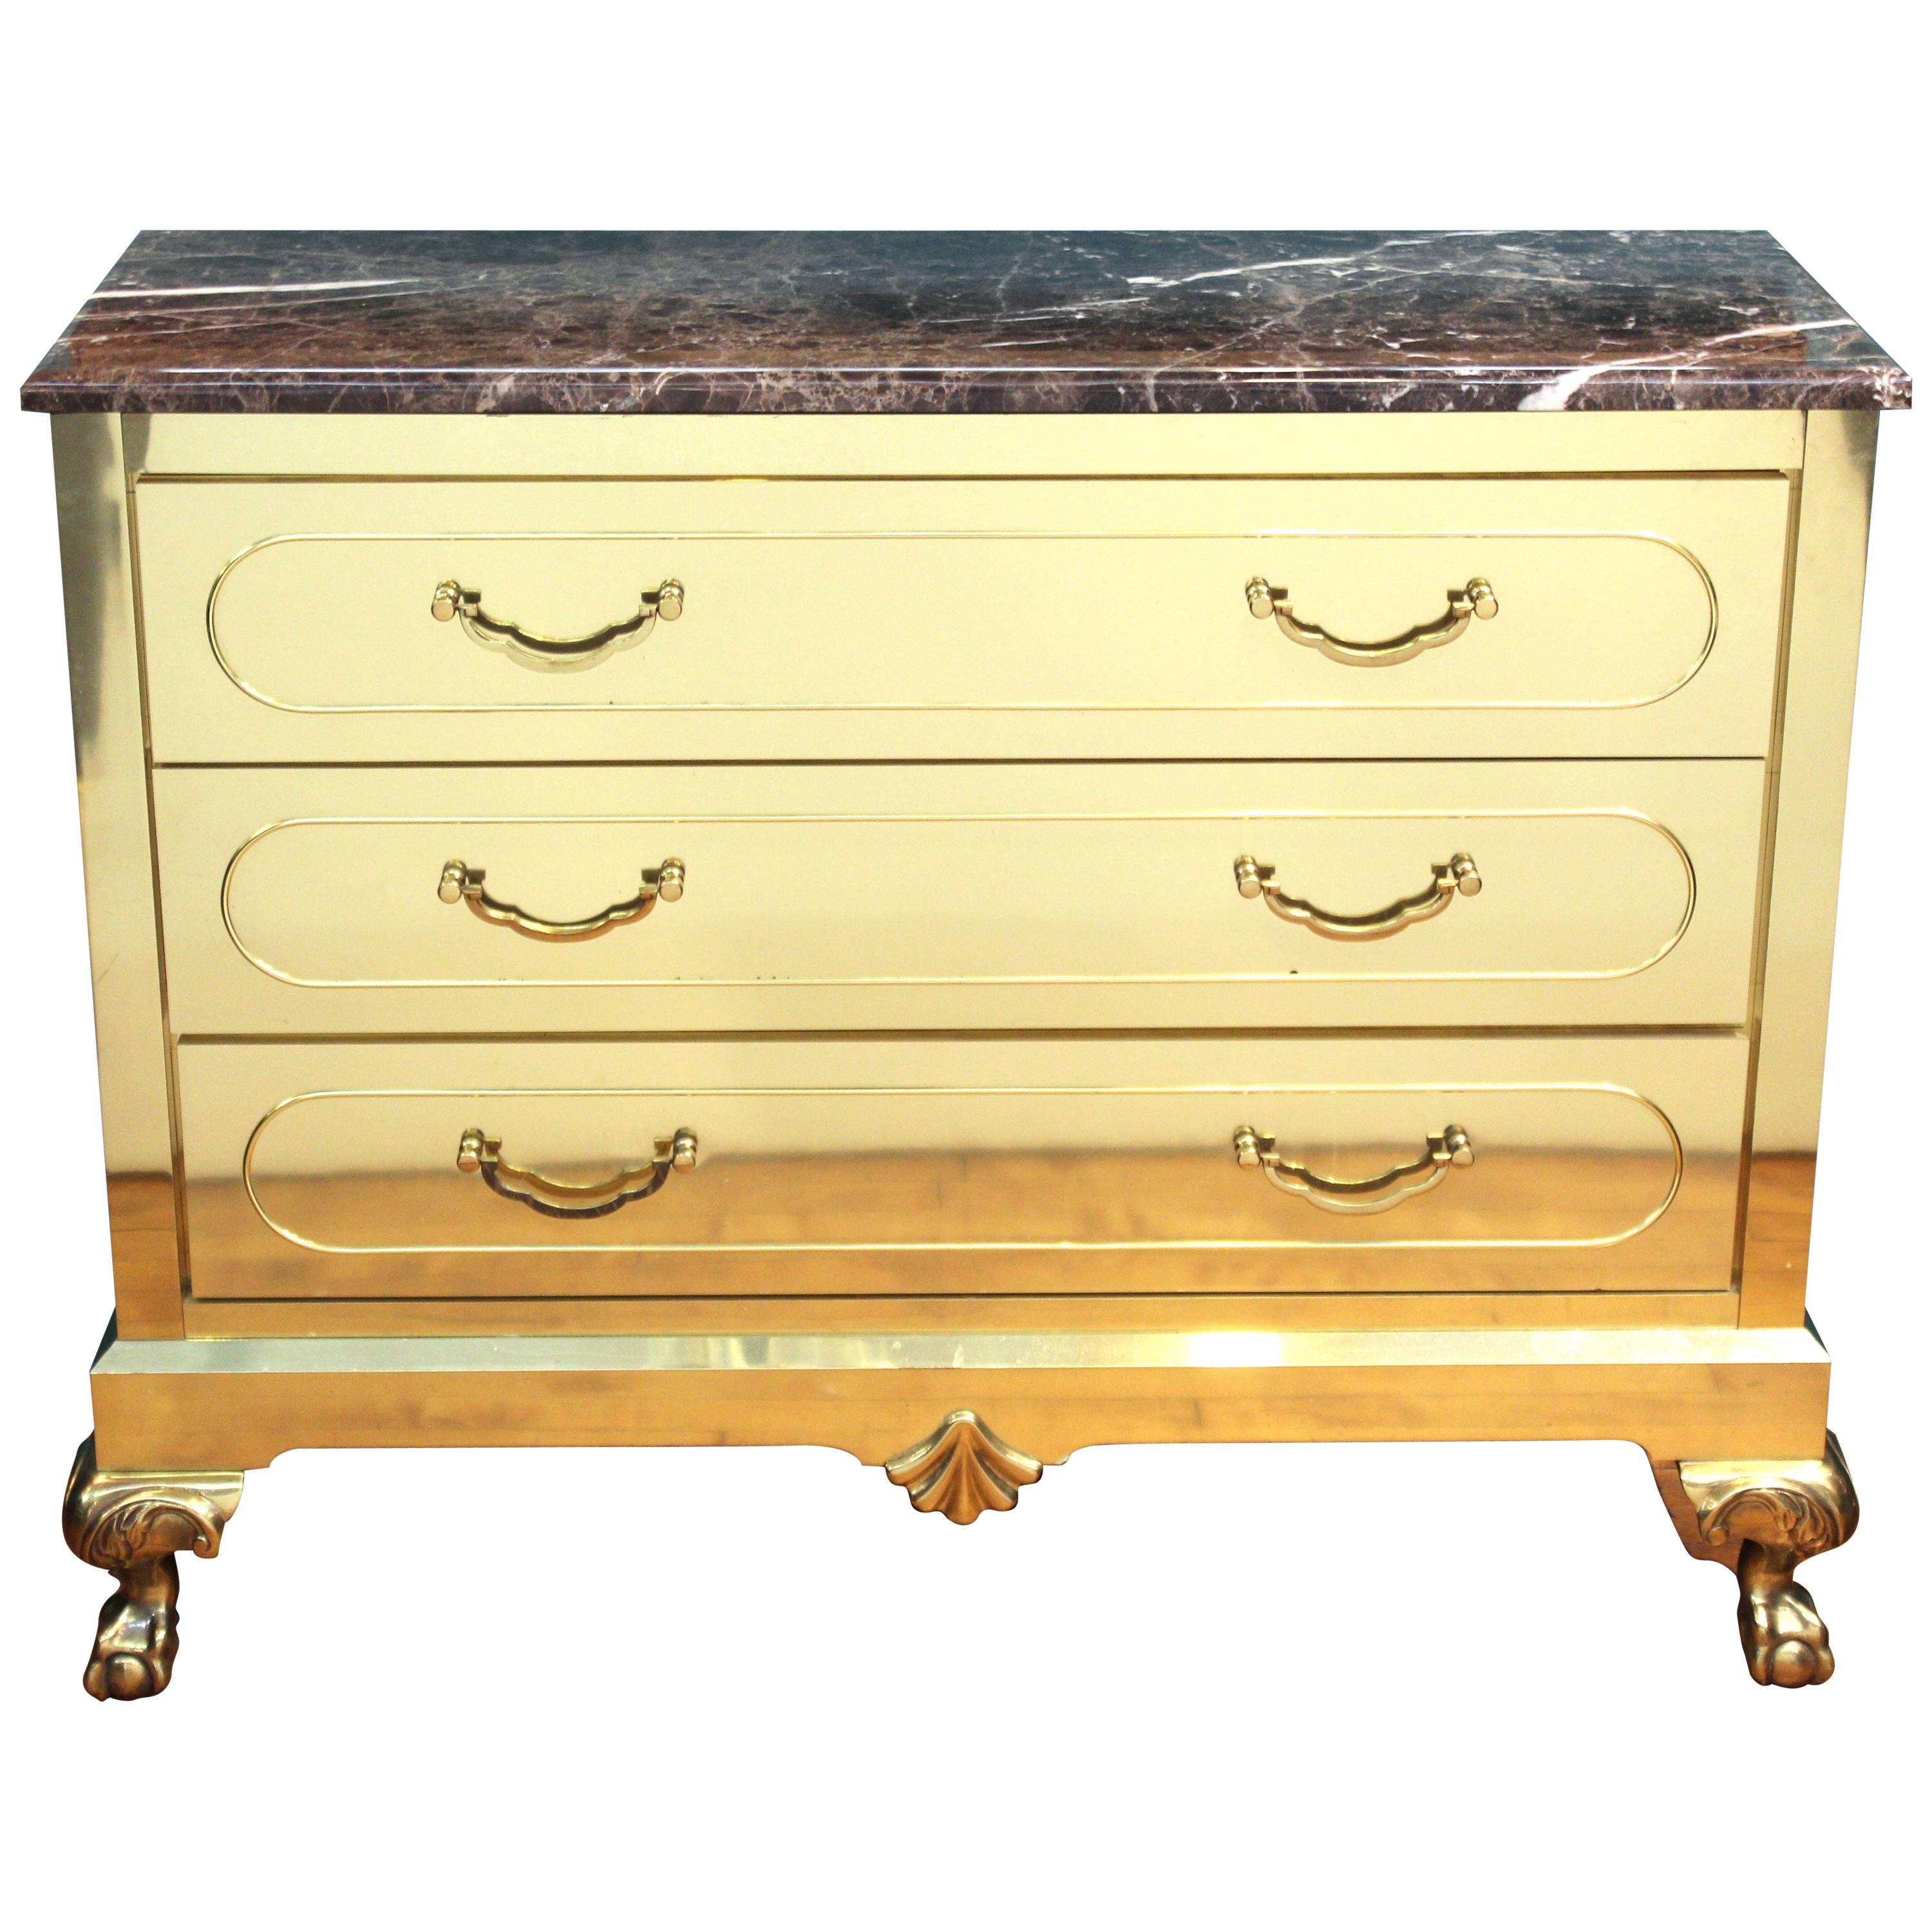 Harden Furniture Modern Brass-Clad Chest of Drawers with Marble Top